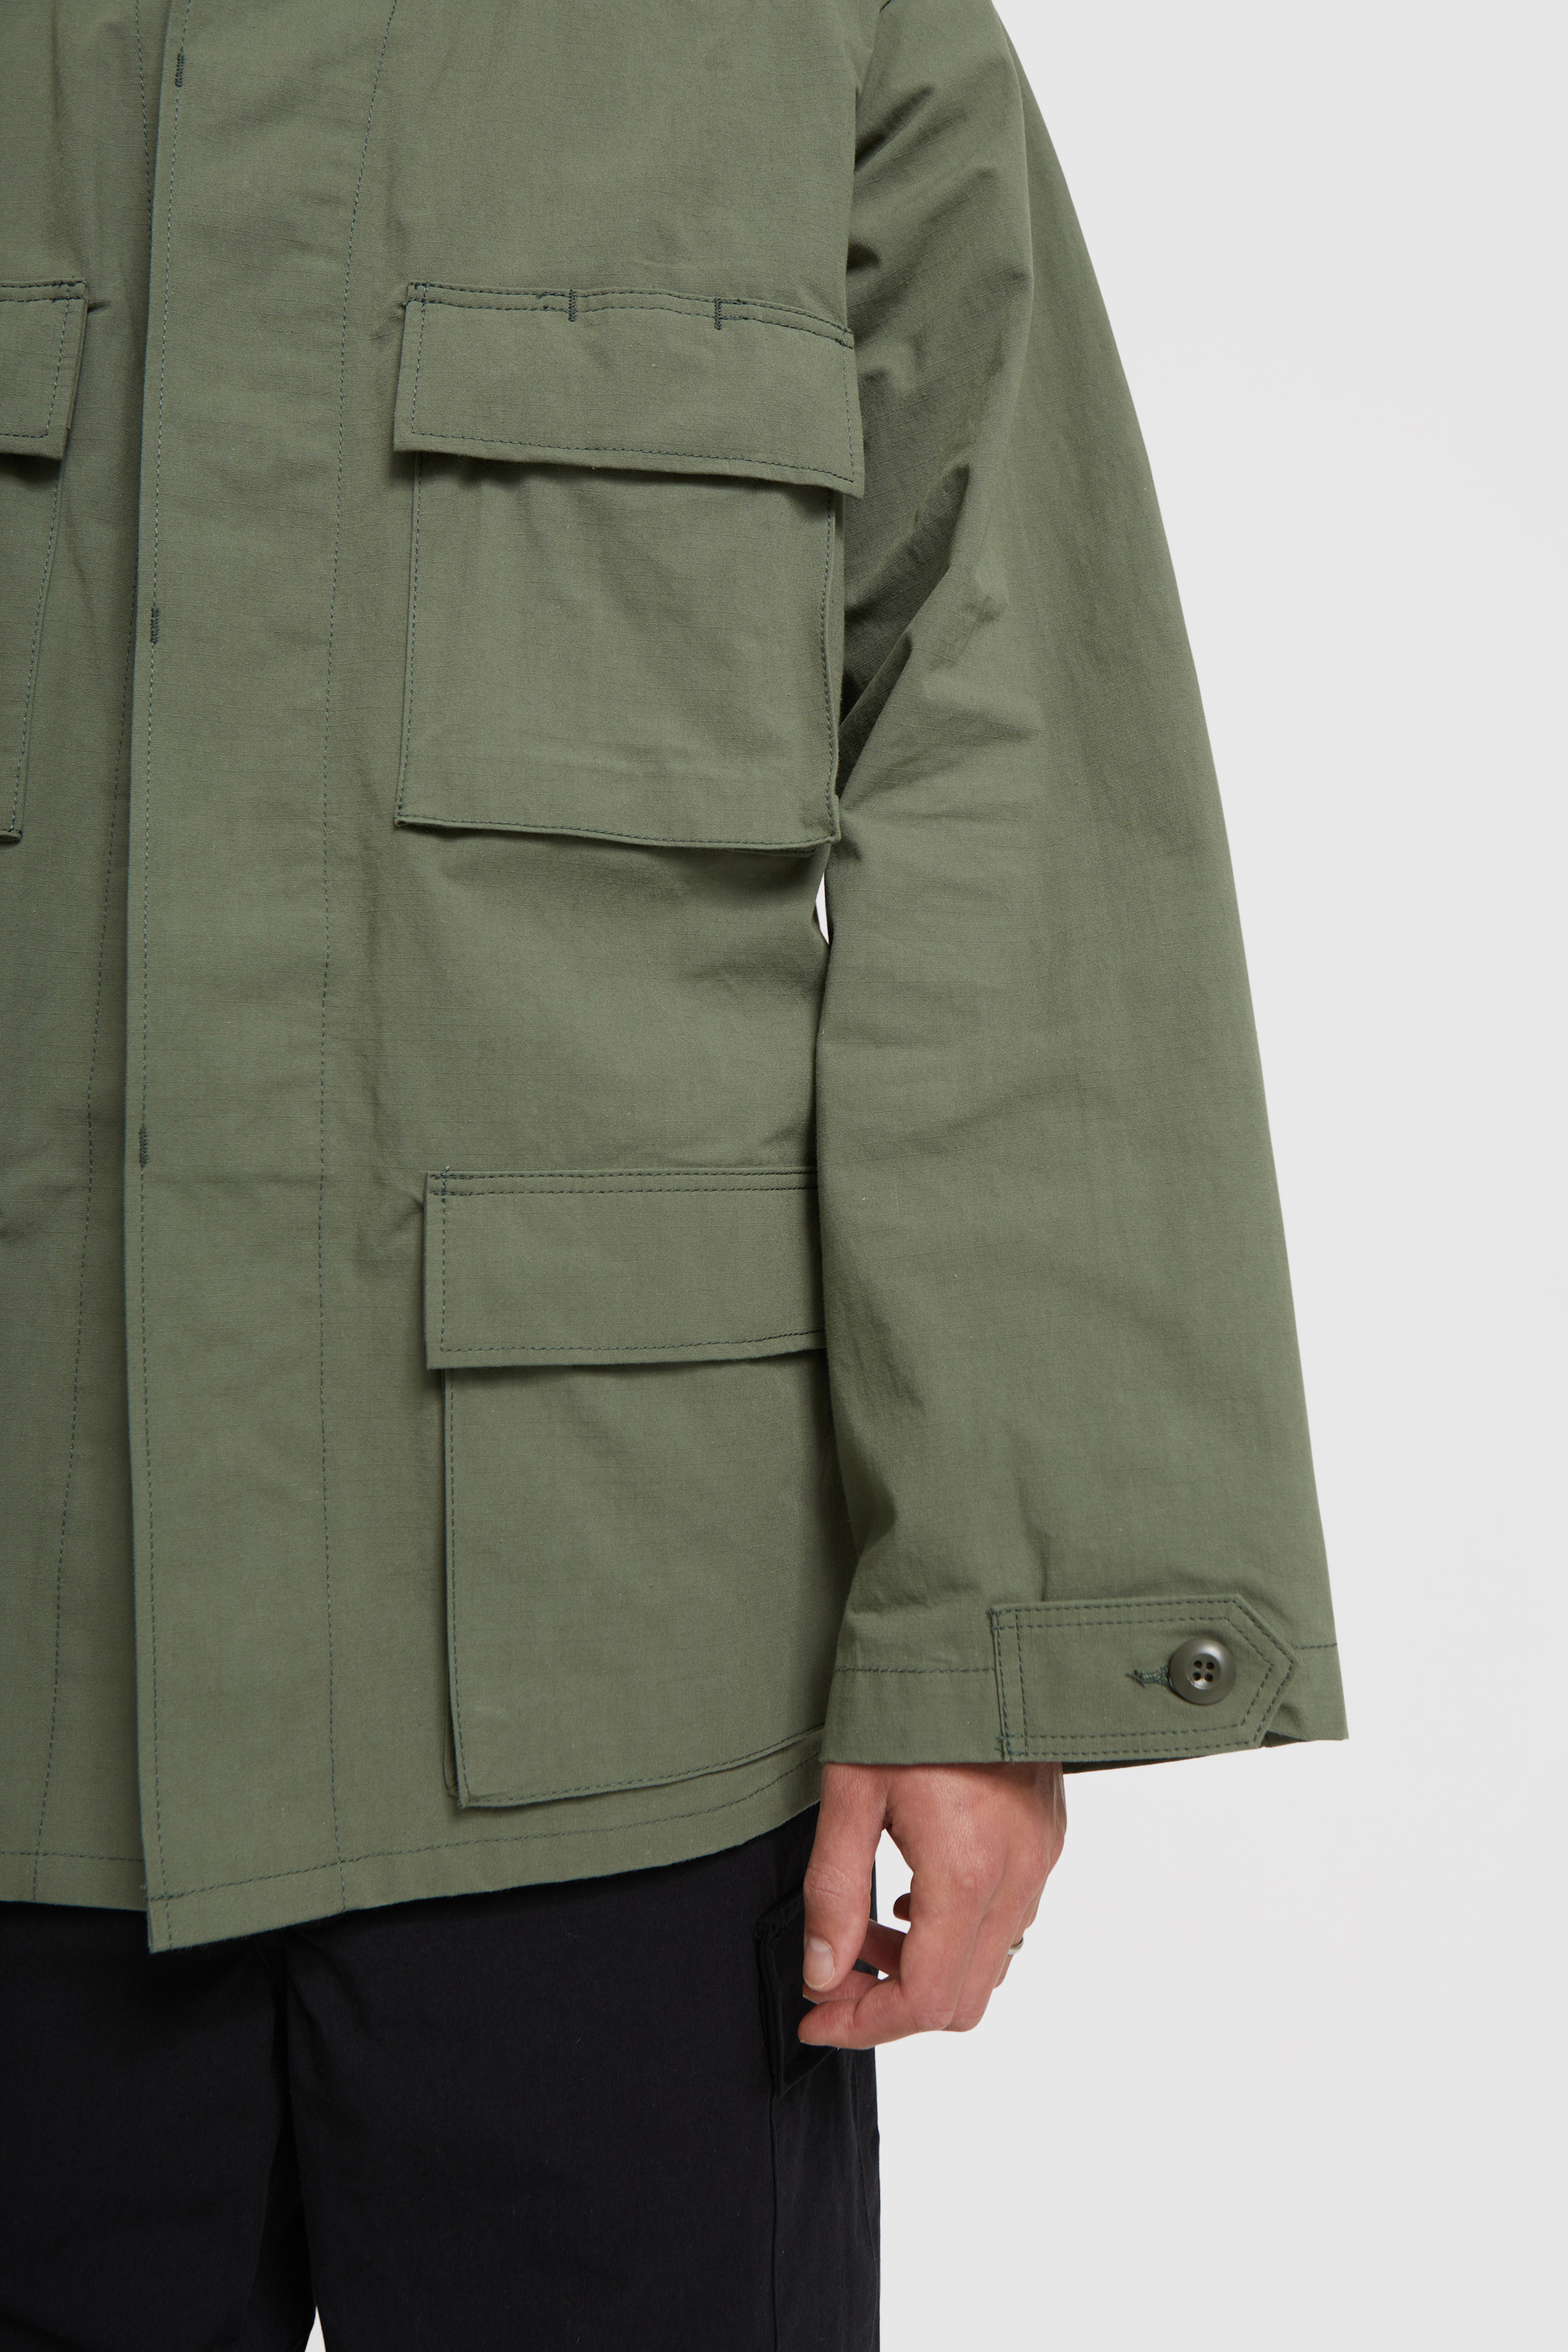 WTAPS WMILL-LS 01 / NYCO. Ripstop Olive drab | WoodWood.com